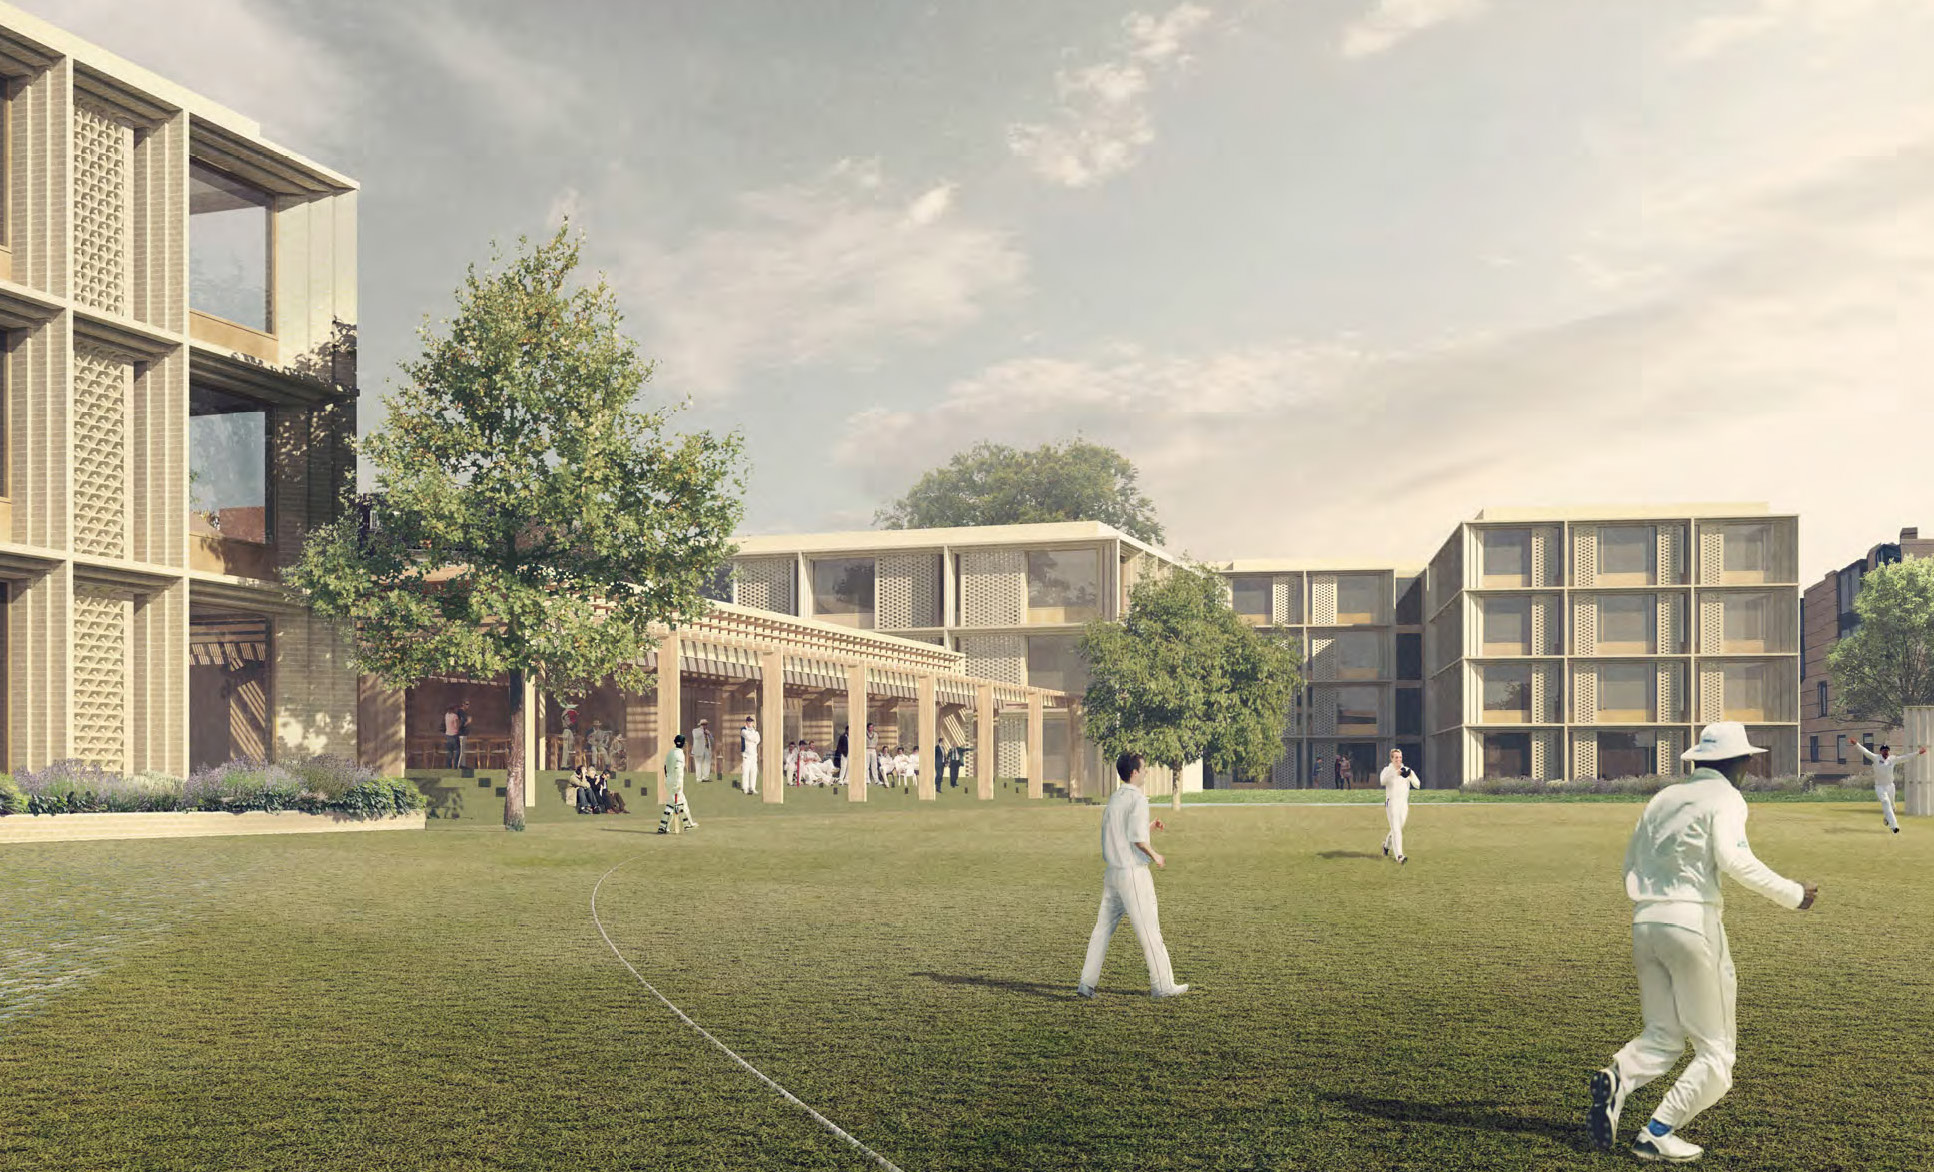 Brand new, high-quality accommodation and sports facilities for Oxford’s iconic Balliol College